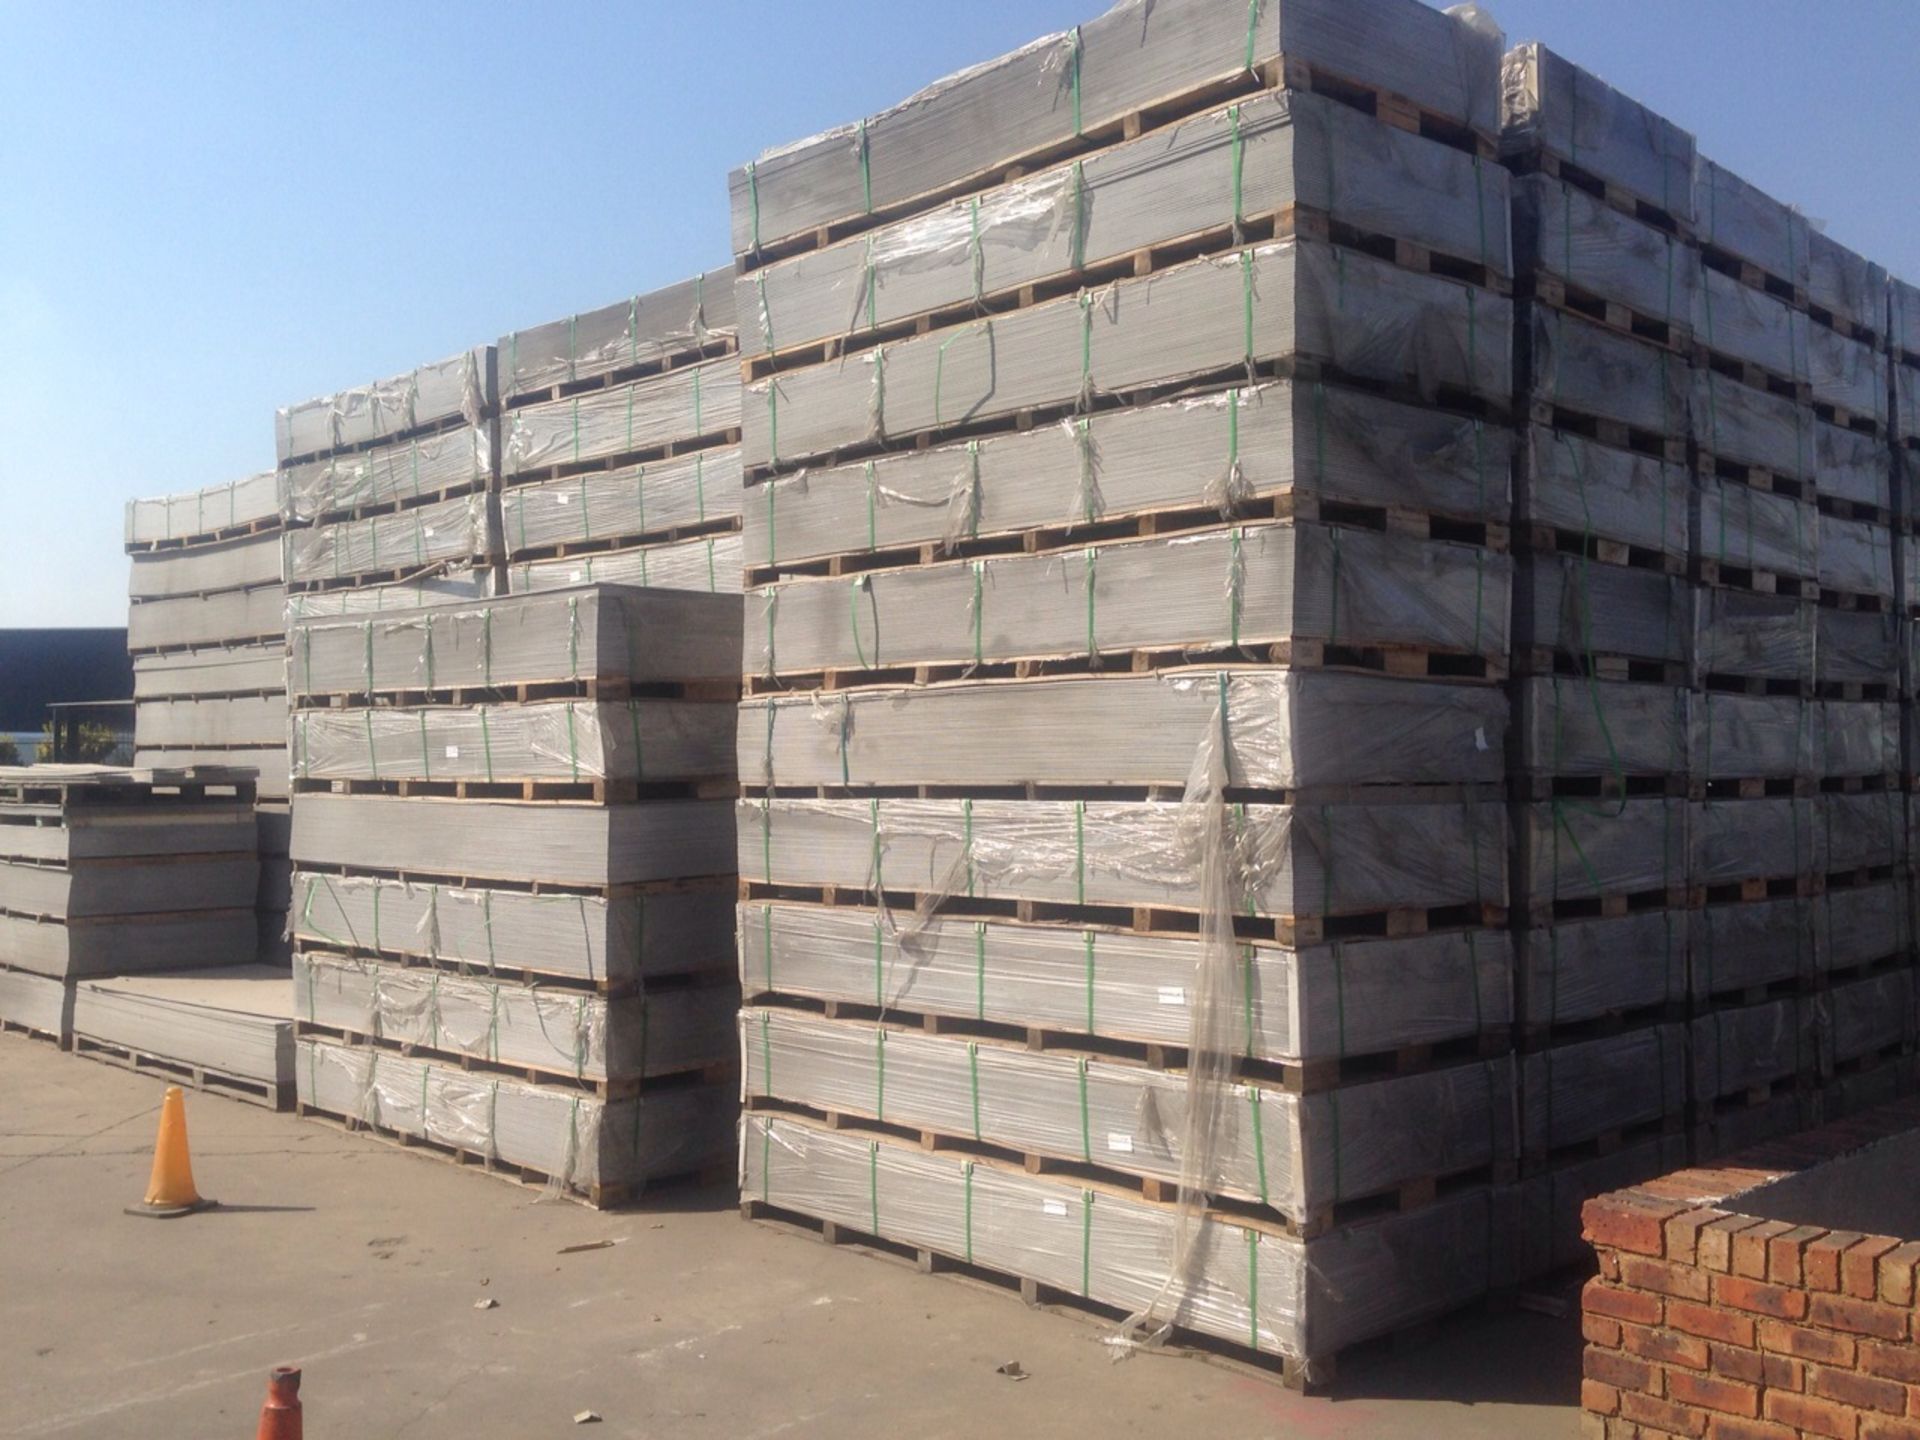 B GRADE FIBRE CEMENT BOARD 6MM TAPERED EDGE 3000 X 1200 (5 PALLETS - 50 BOARDS / PALLET) - Image 2 of 3